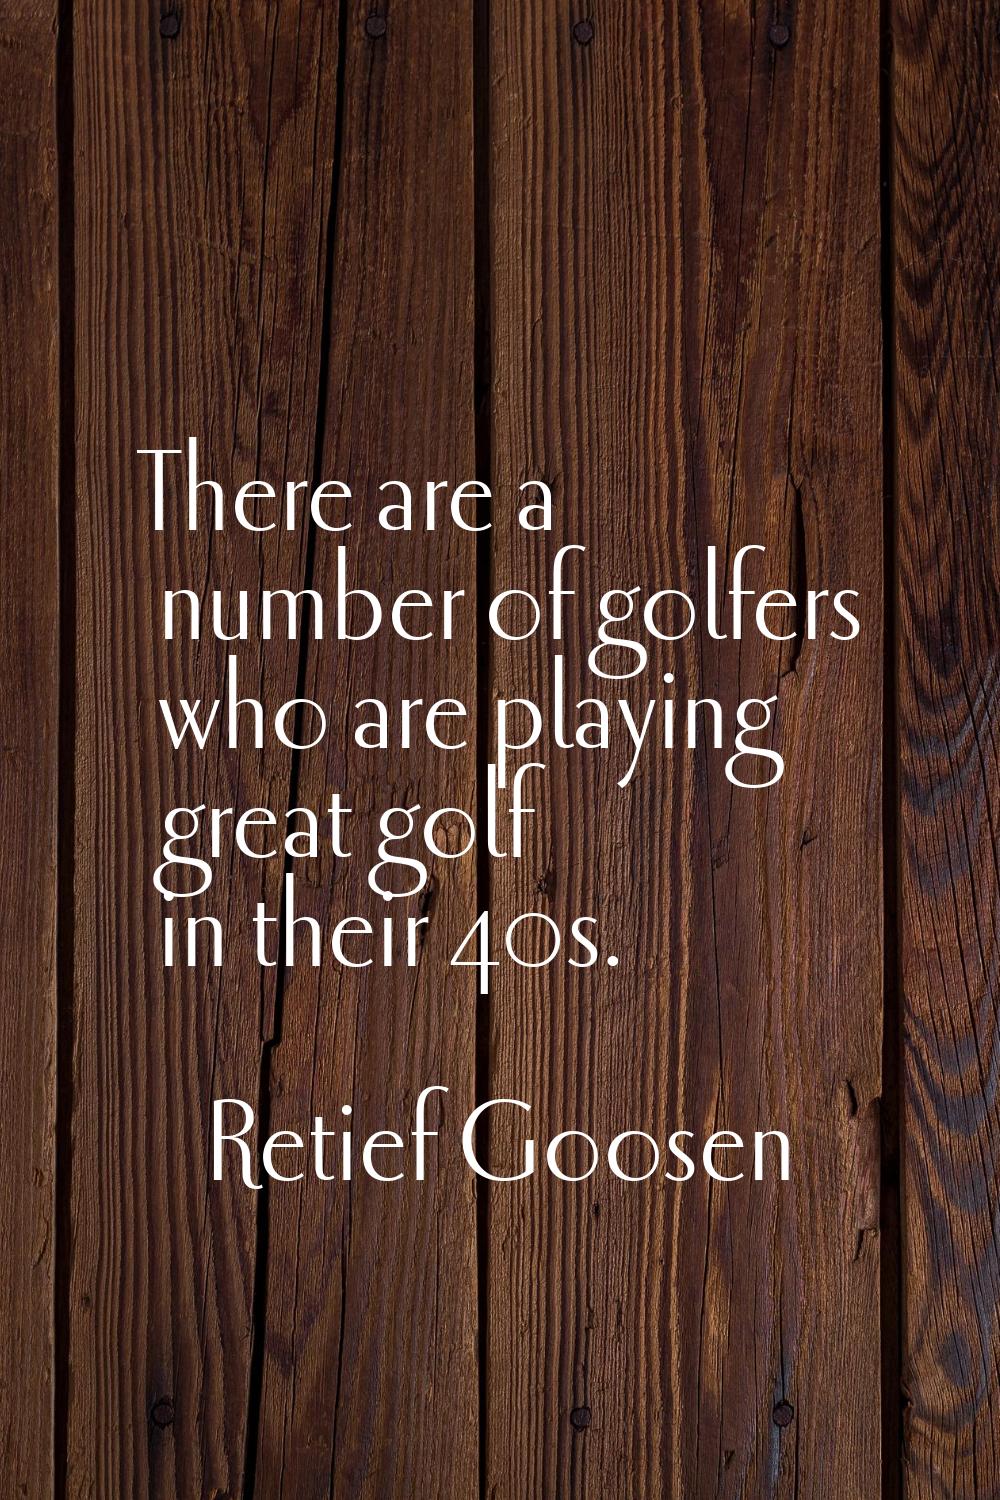 There are a number of golfers who are playing great golf in their 40s.